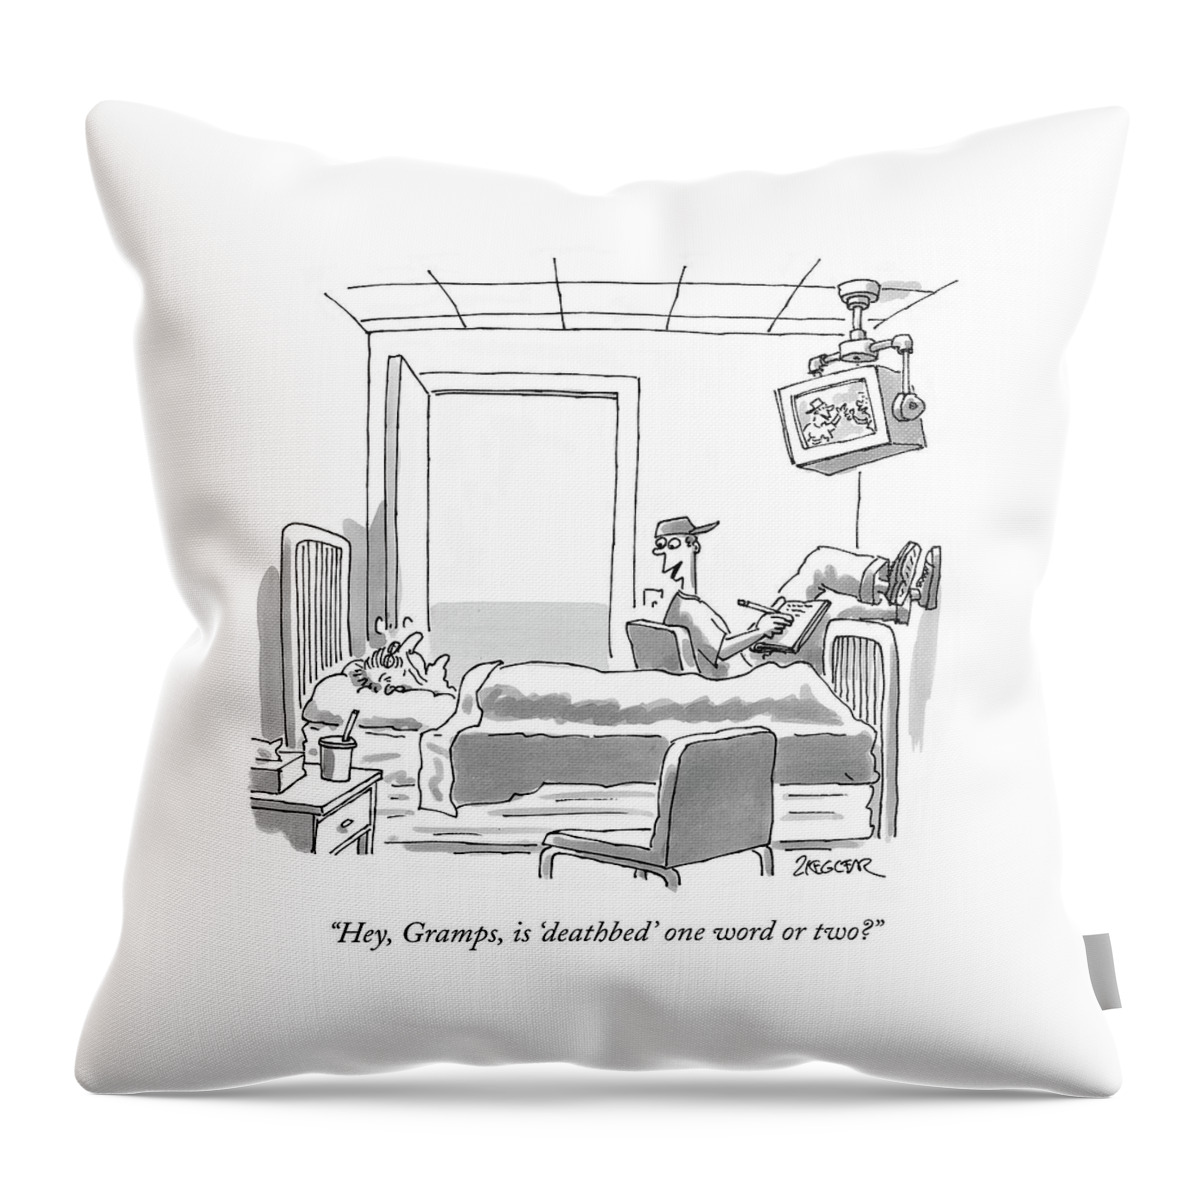 Hey, Gramps, Is 'deathbed' One Word Or Two? Throw Pillow